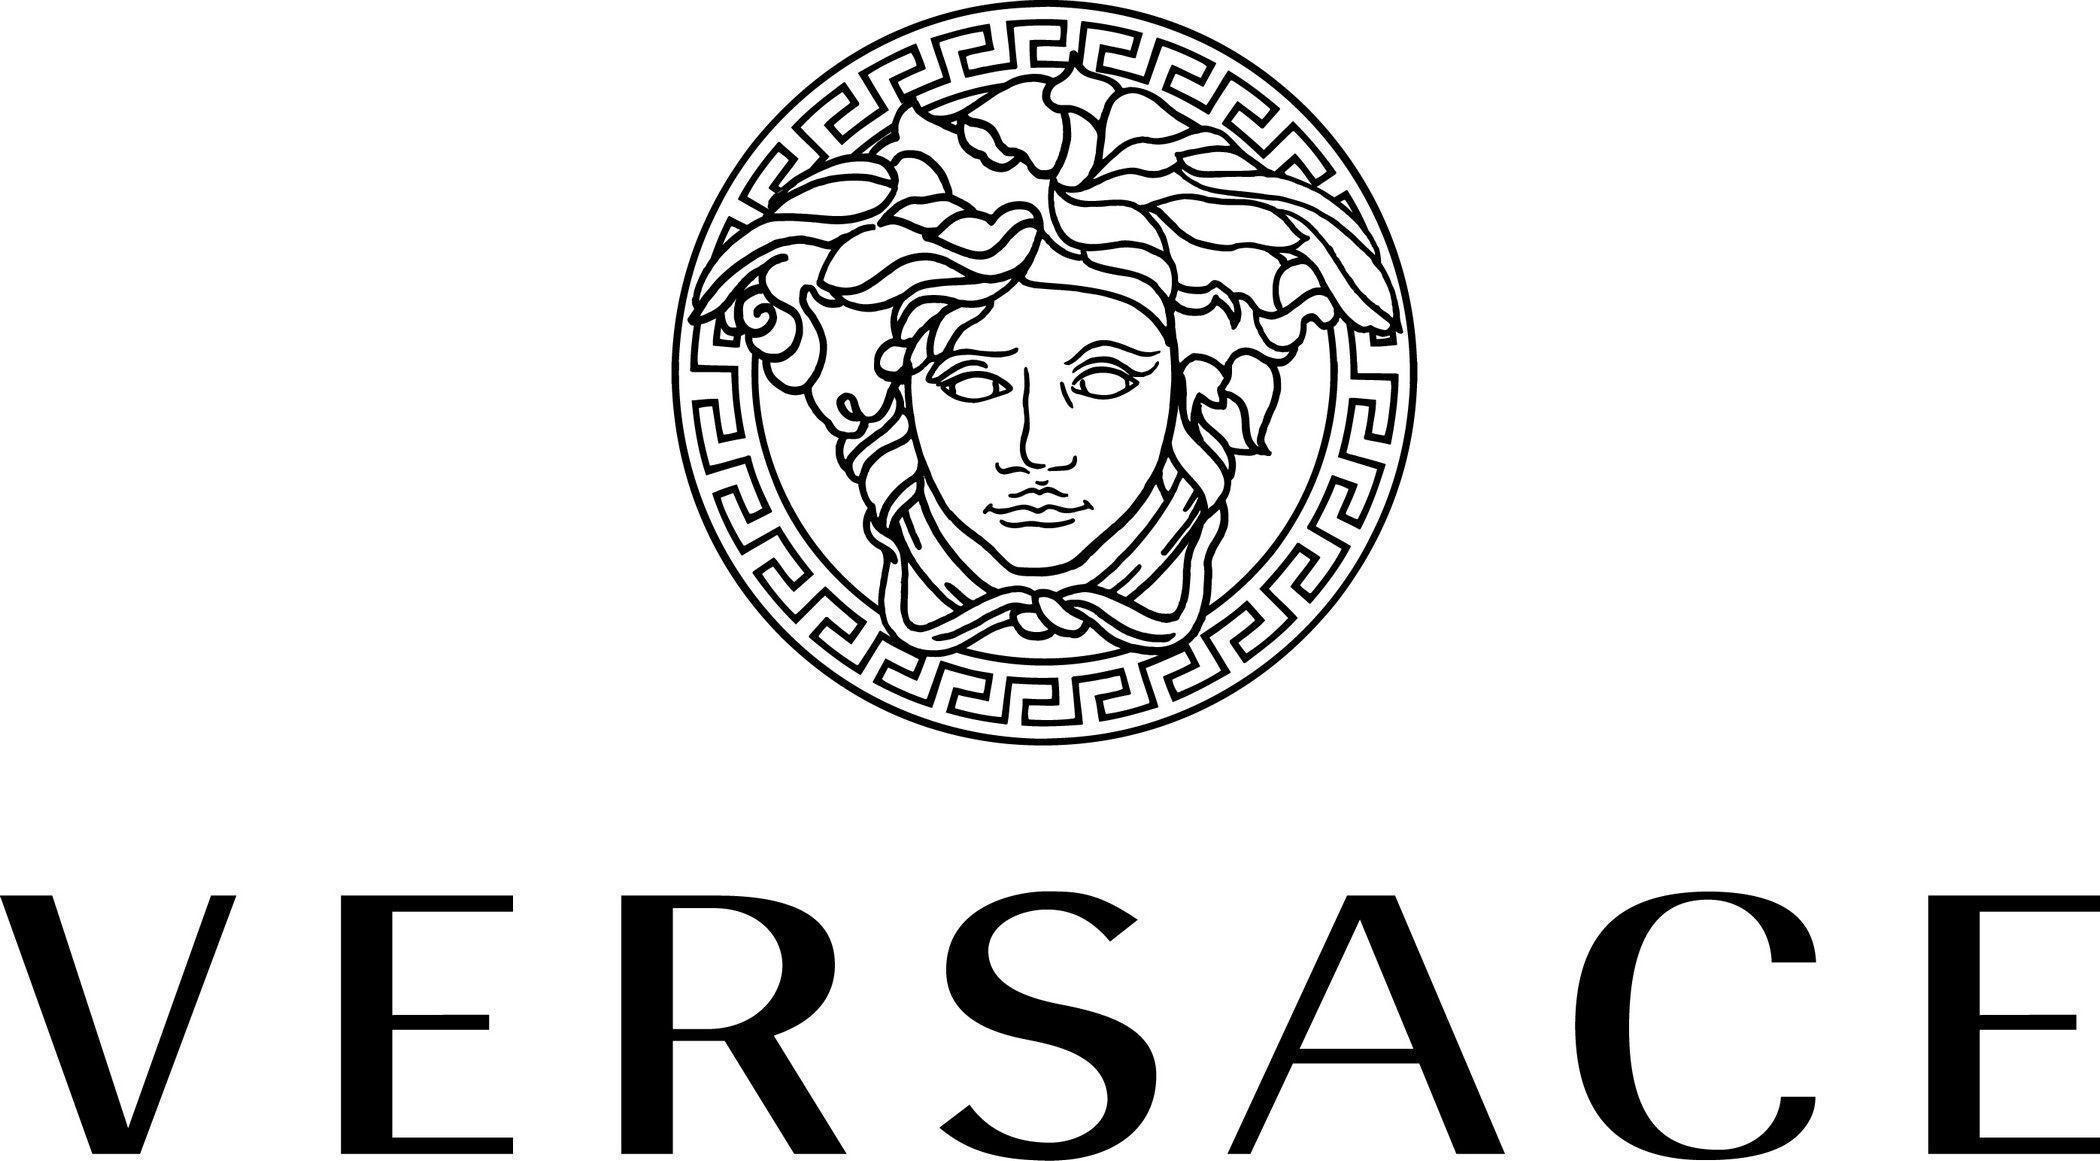 Fashion clothes from Versace wallpapers and image